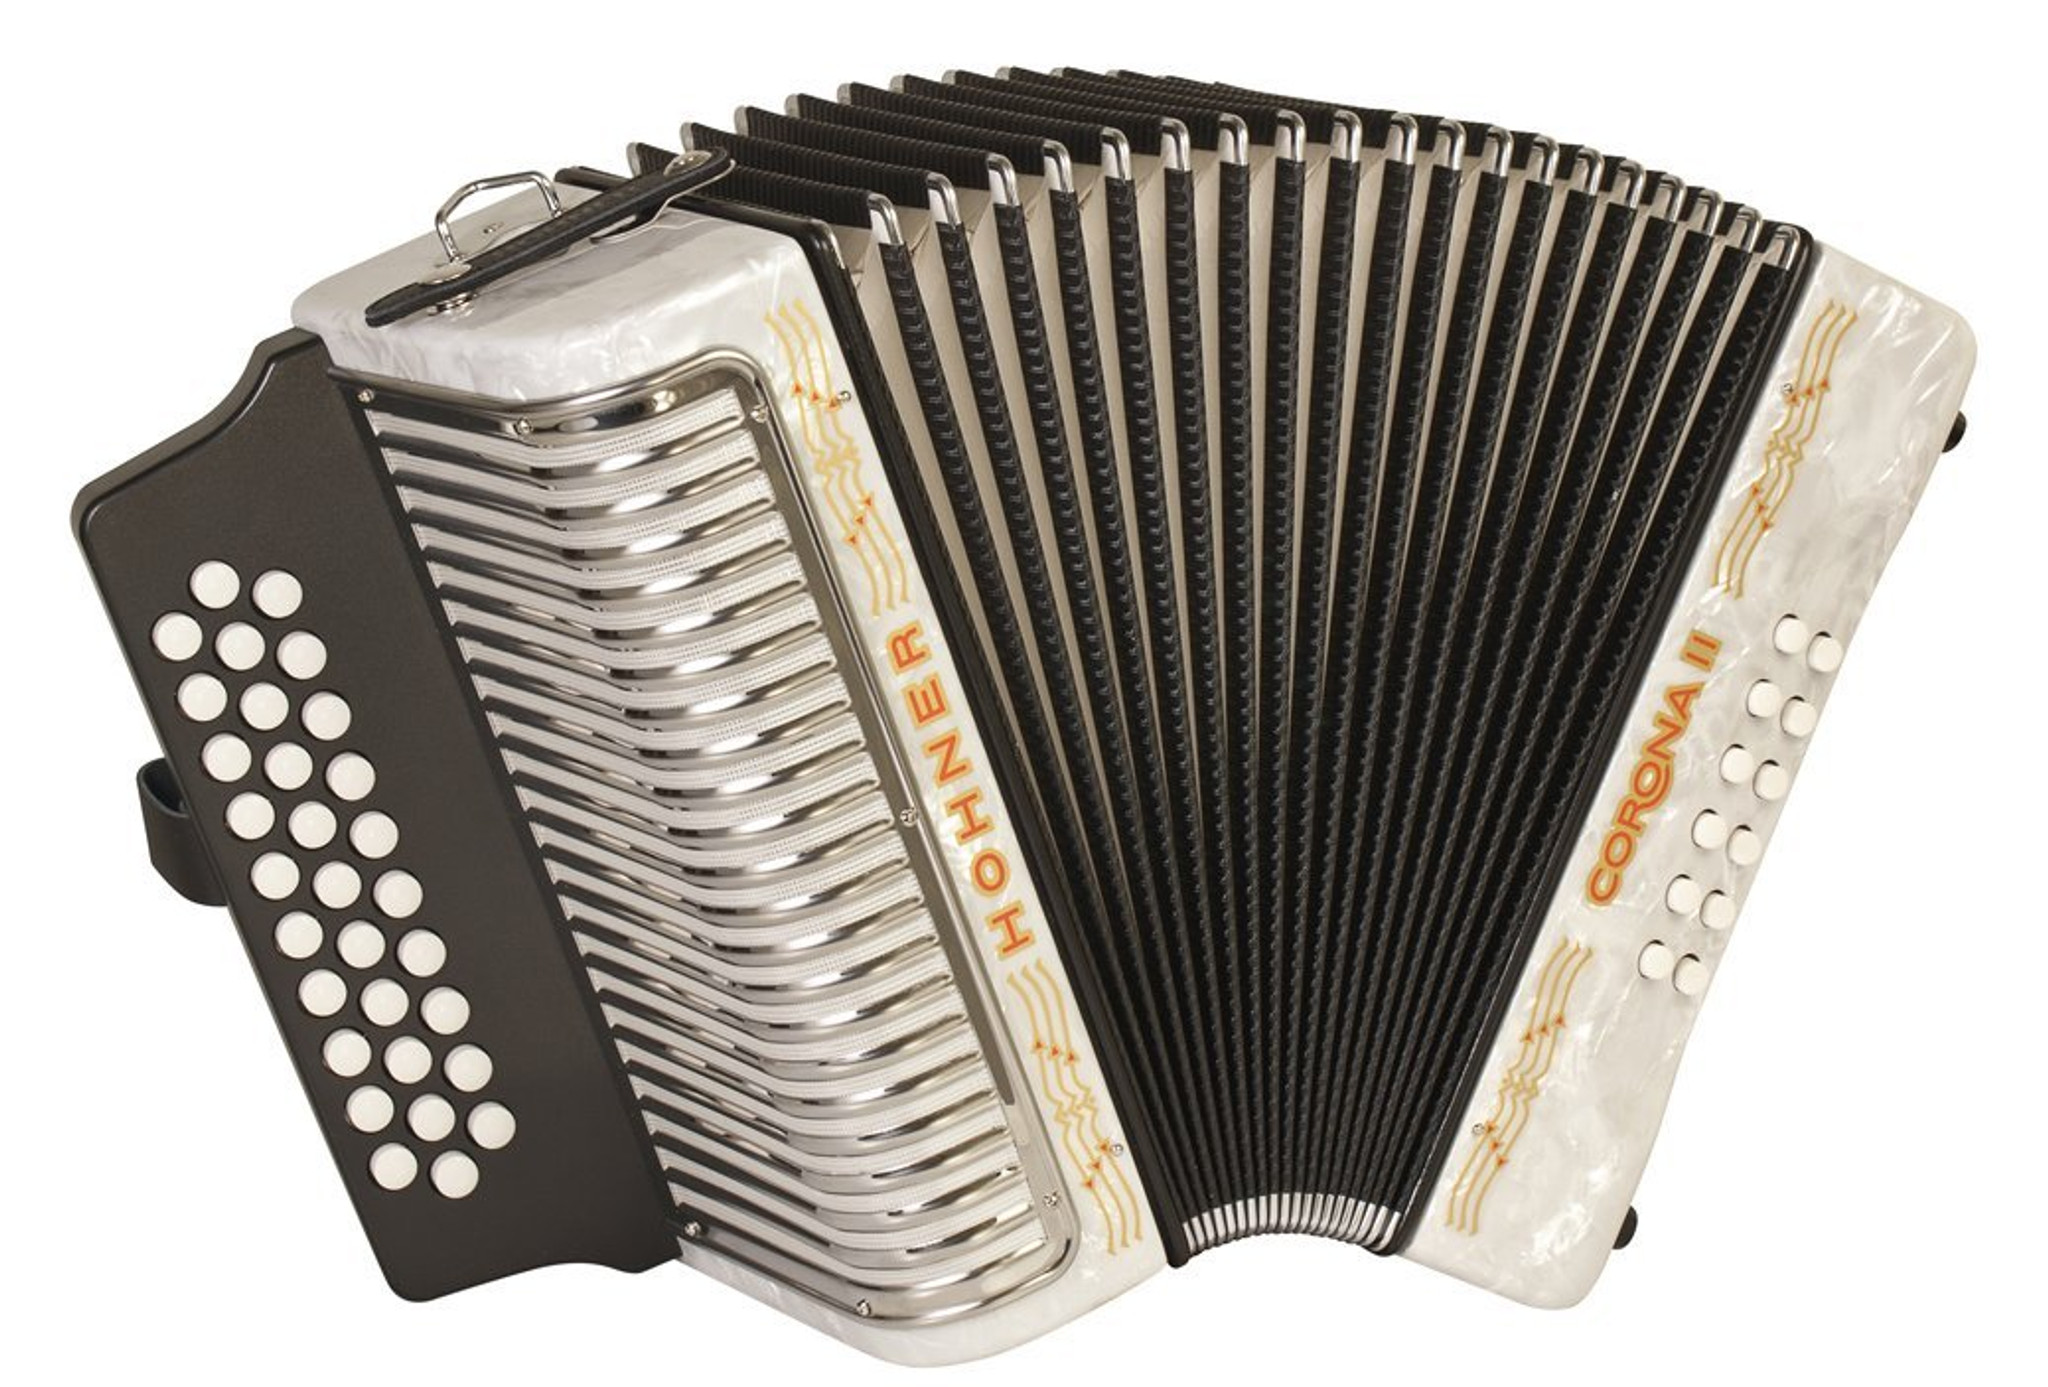 in　Key　Sounds　Corona　3500FW　with　of　Accordion　43-Key　Hohner　the　F　Zorro　II　Finish　Button　White